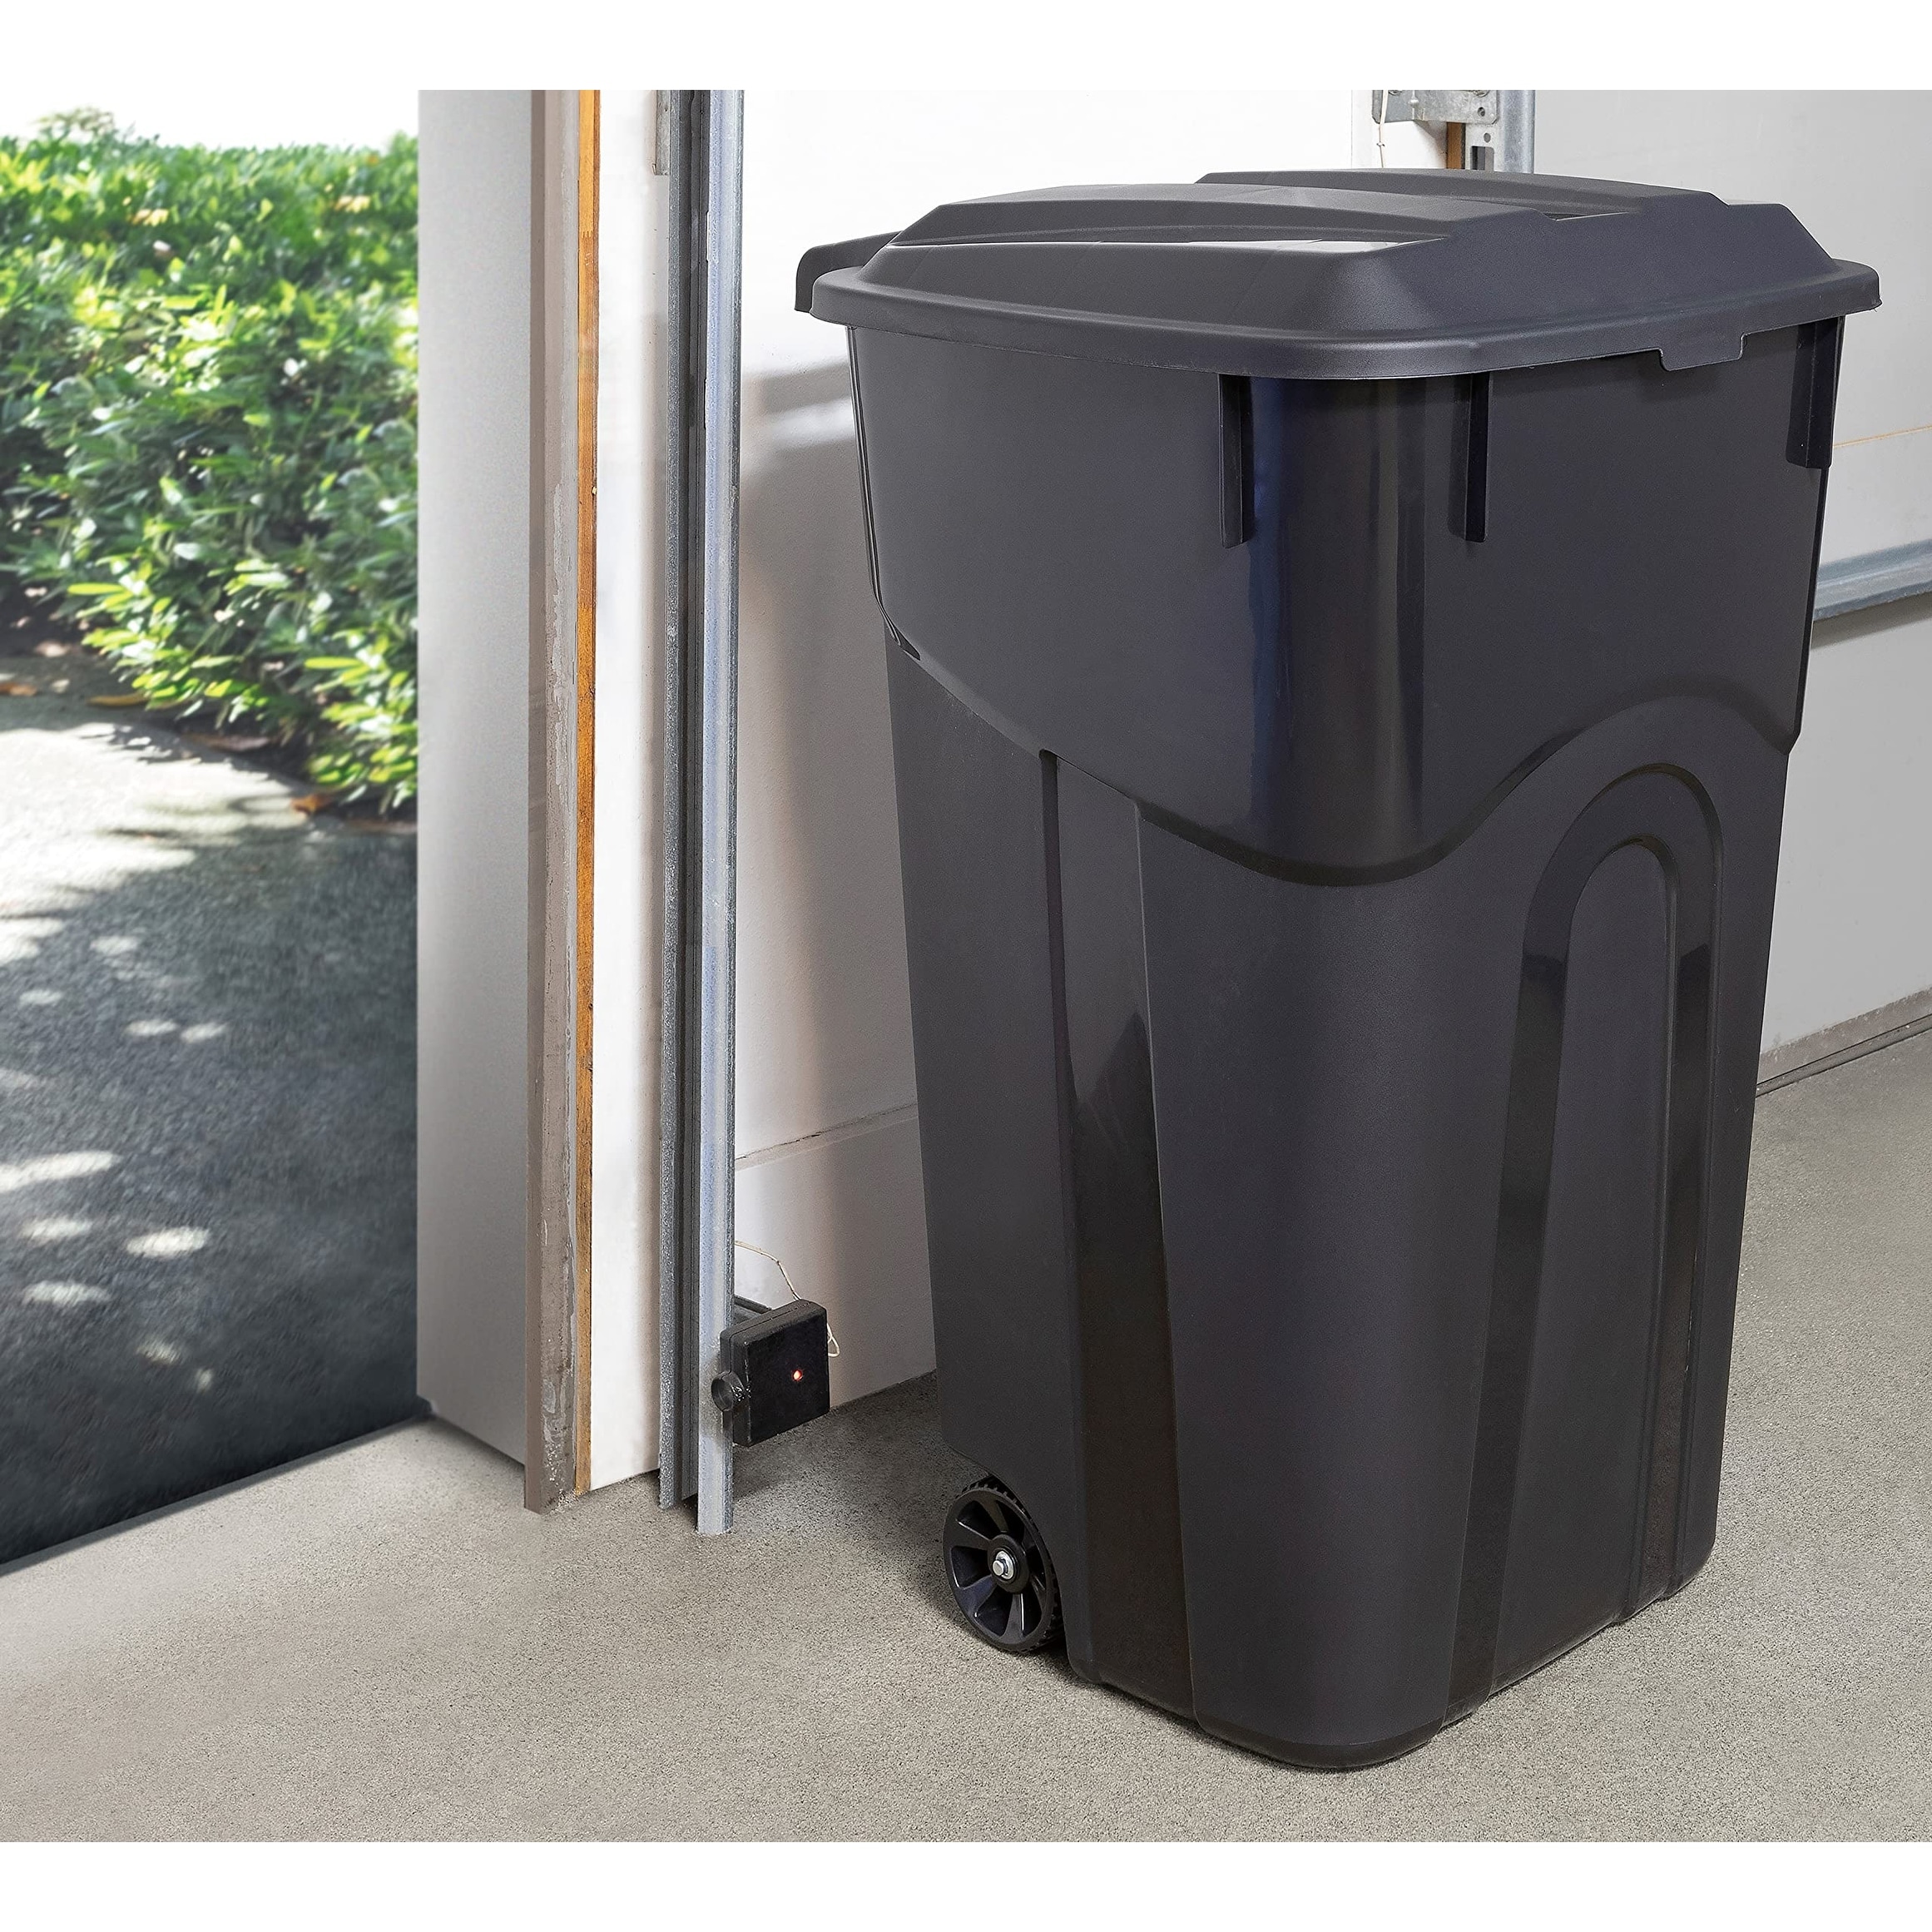 https://ak1.ostkcdn.com/images/products/is/images/direct/f10f177ac8e3c60b182d066881692bee9aed2a23/32-Gallon-Wheeled-Outdoor-Garbage-Can-with-Attached-Snap-Lock-Lid-and-Handles%2C-Perfect-Backyard%2C-Deck%2C-or-Garage-Trash-Can%2C-2pcs.jpg